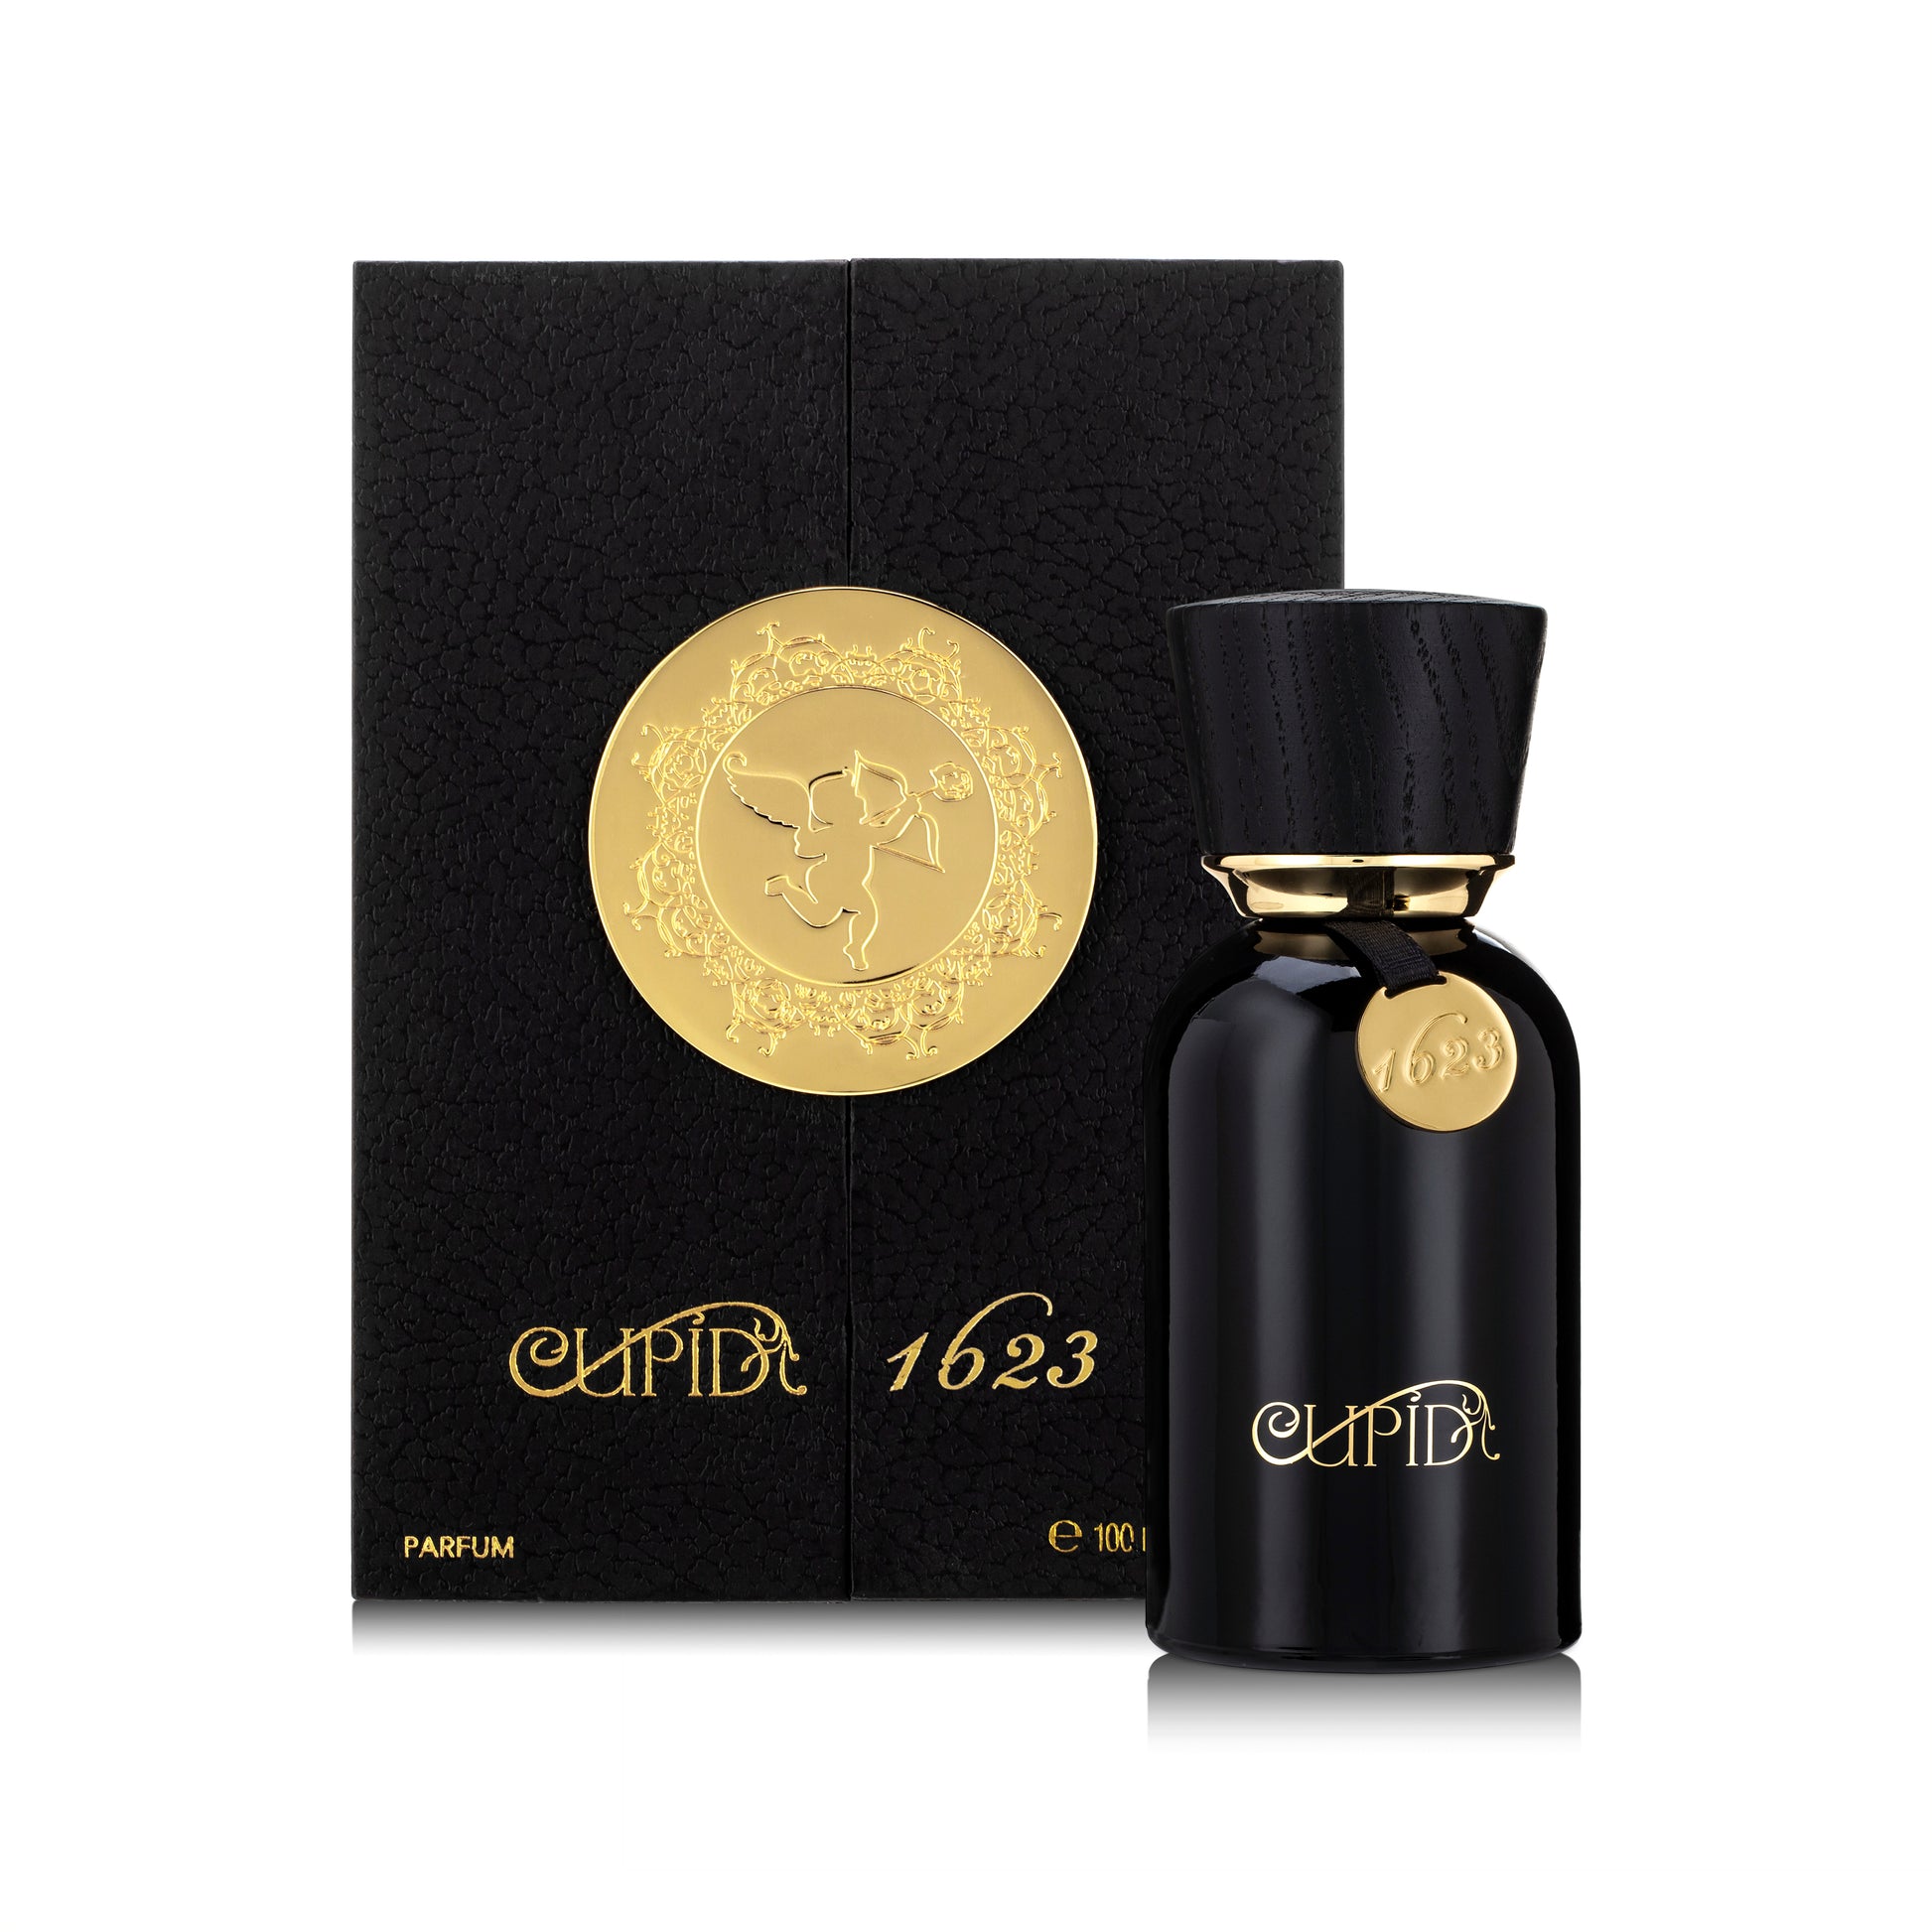 Cupid No.5 Cupid Perfumes perfume - a fragrance for women and men 2015